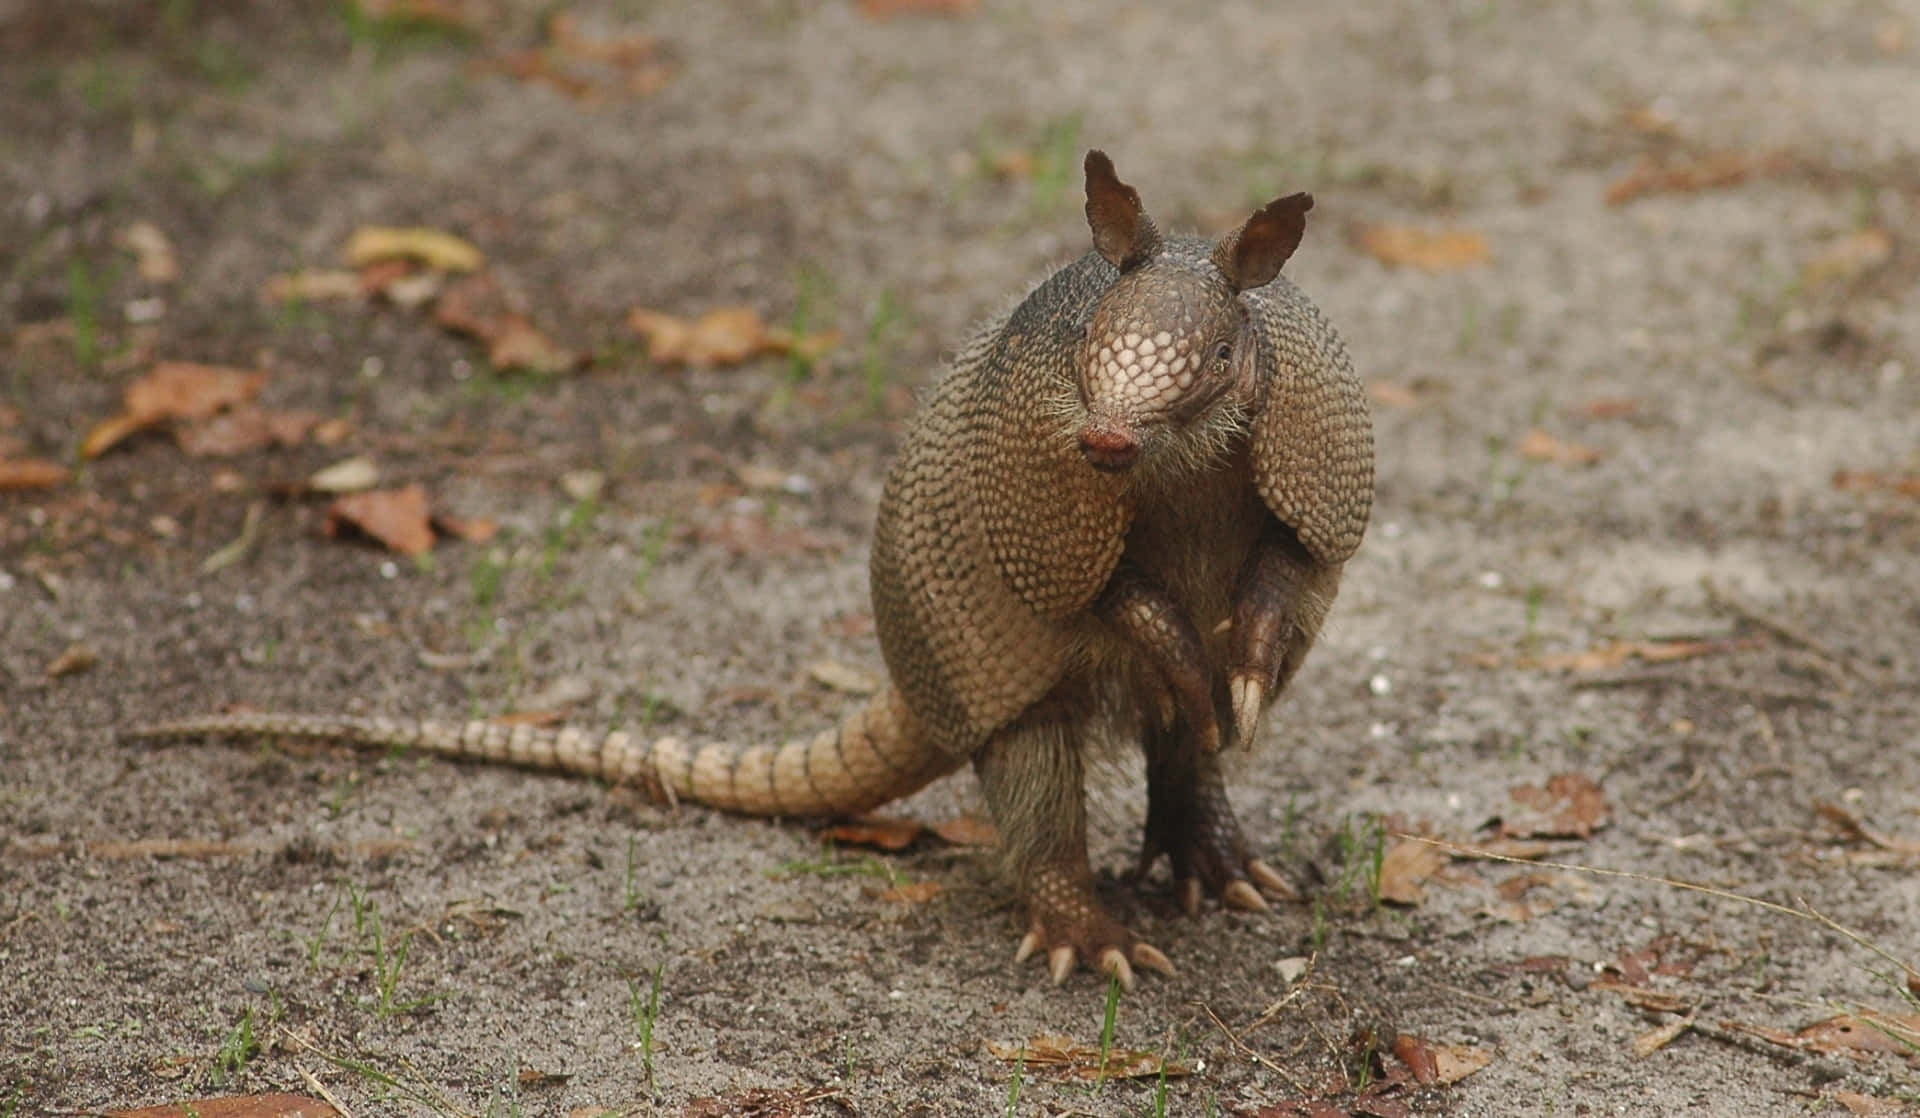 A Small Armadillo Is Walking On The Ground